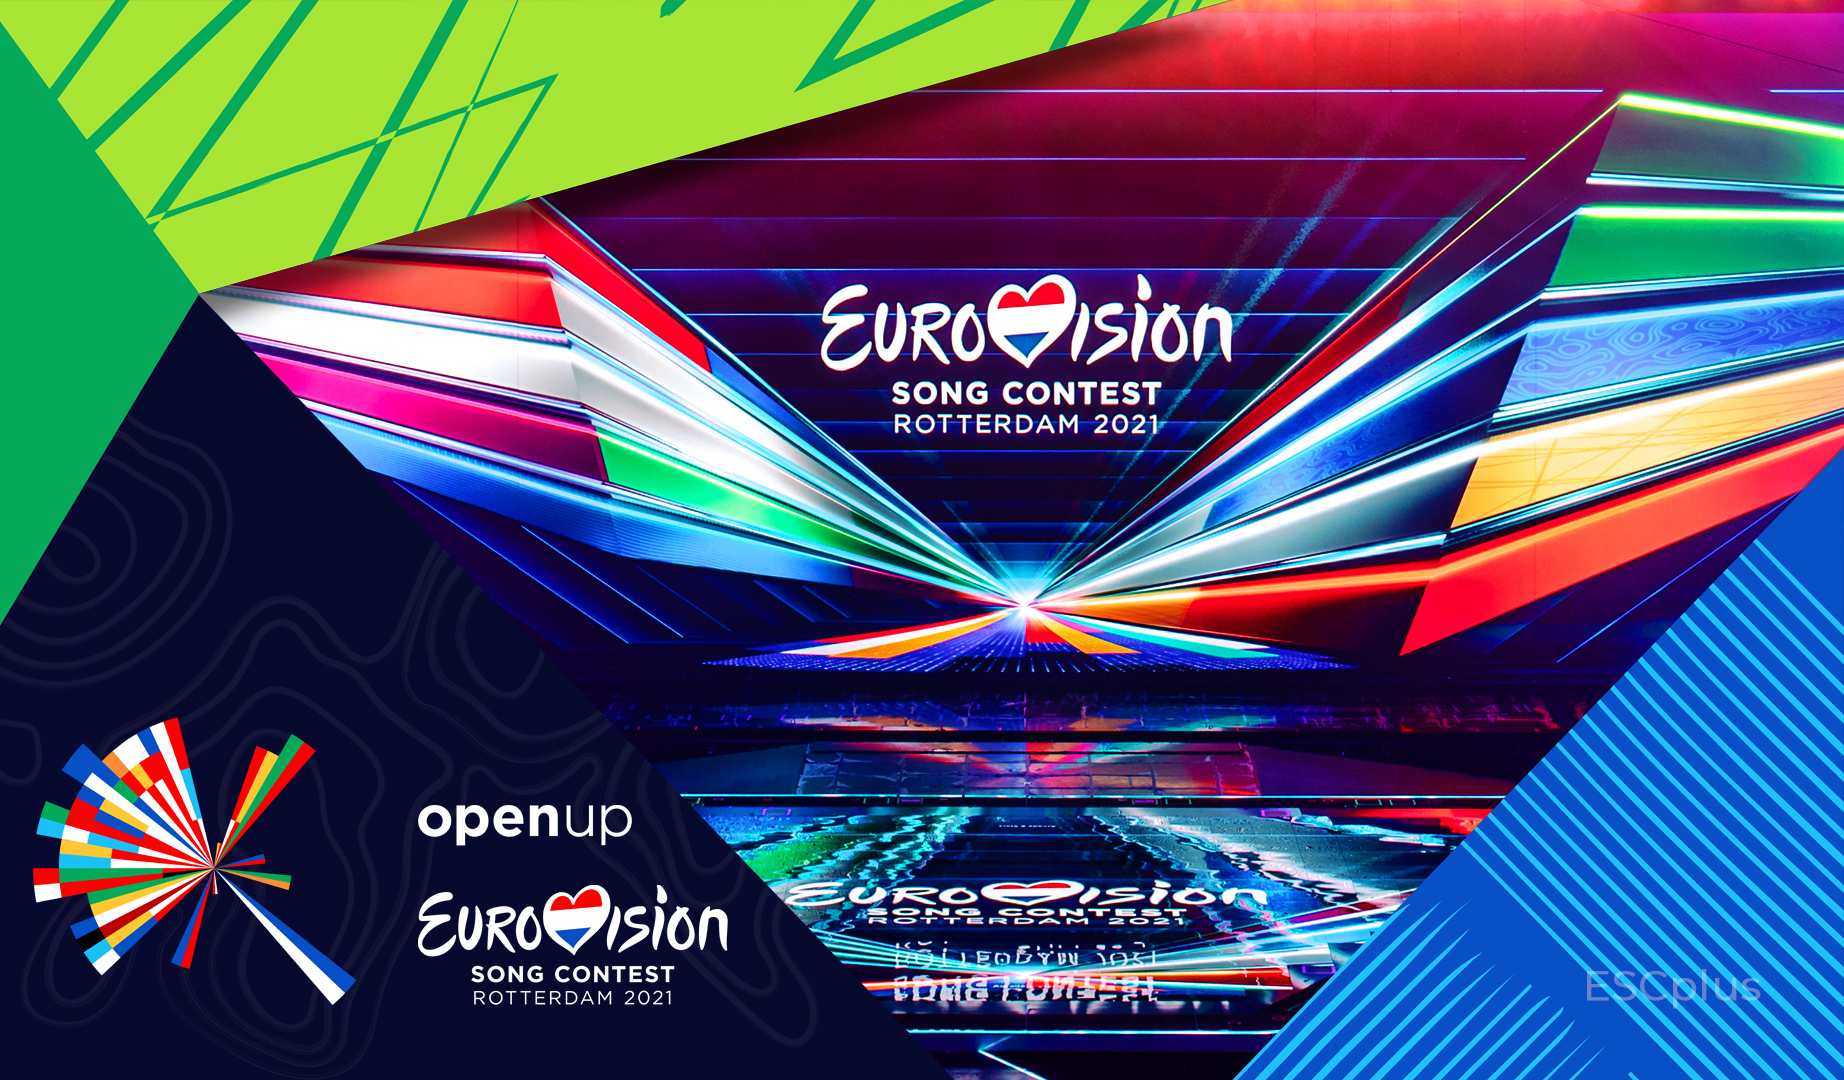 Eurovision 2021: Semi-final 2 is happening tonight! Read ESCplus’ predictions and insights